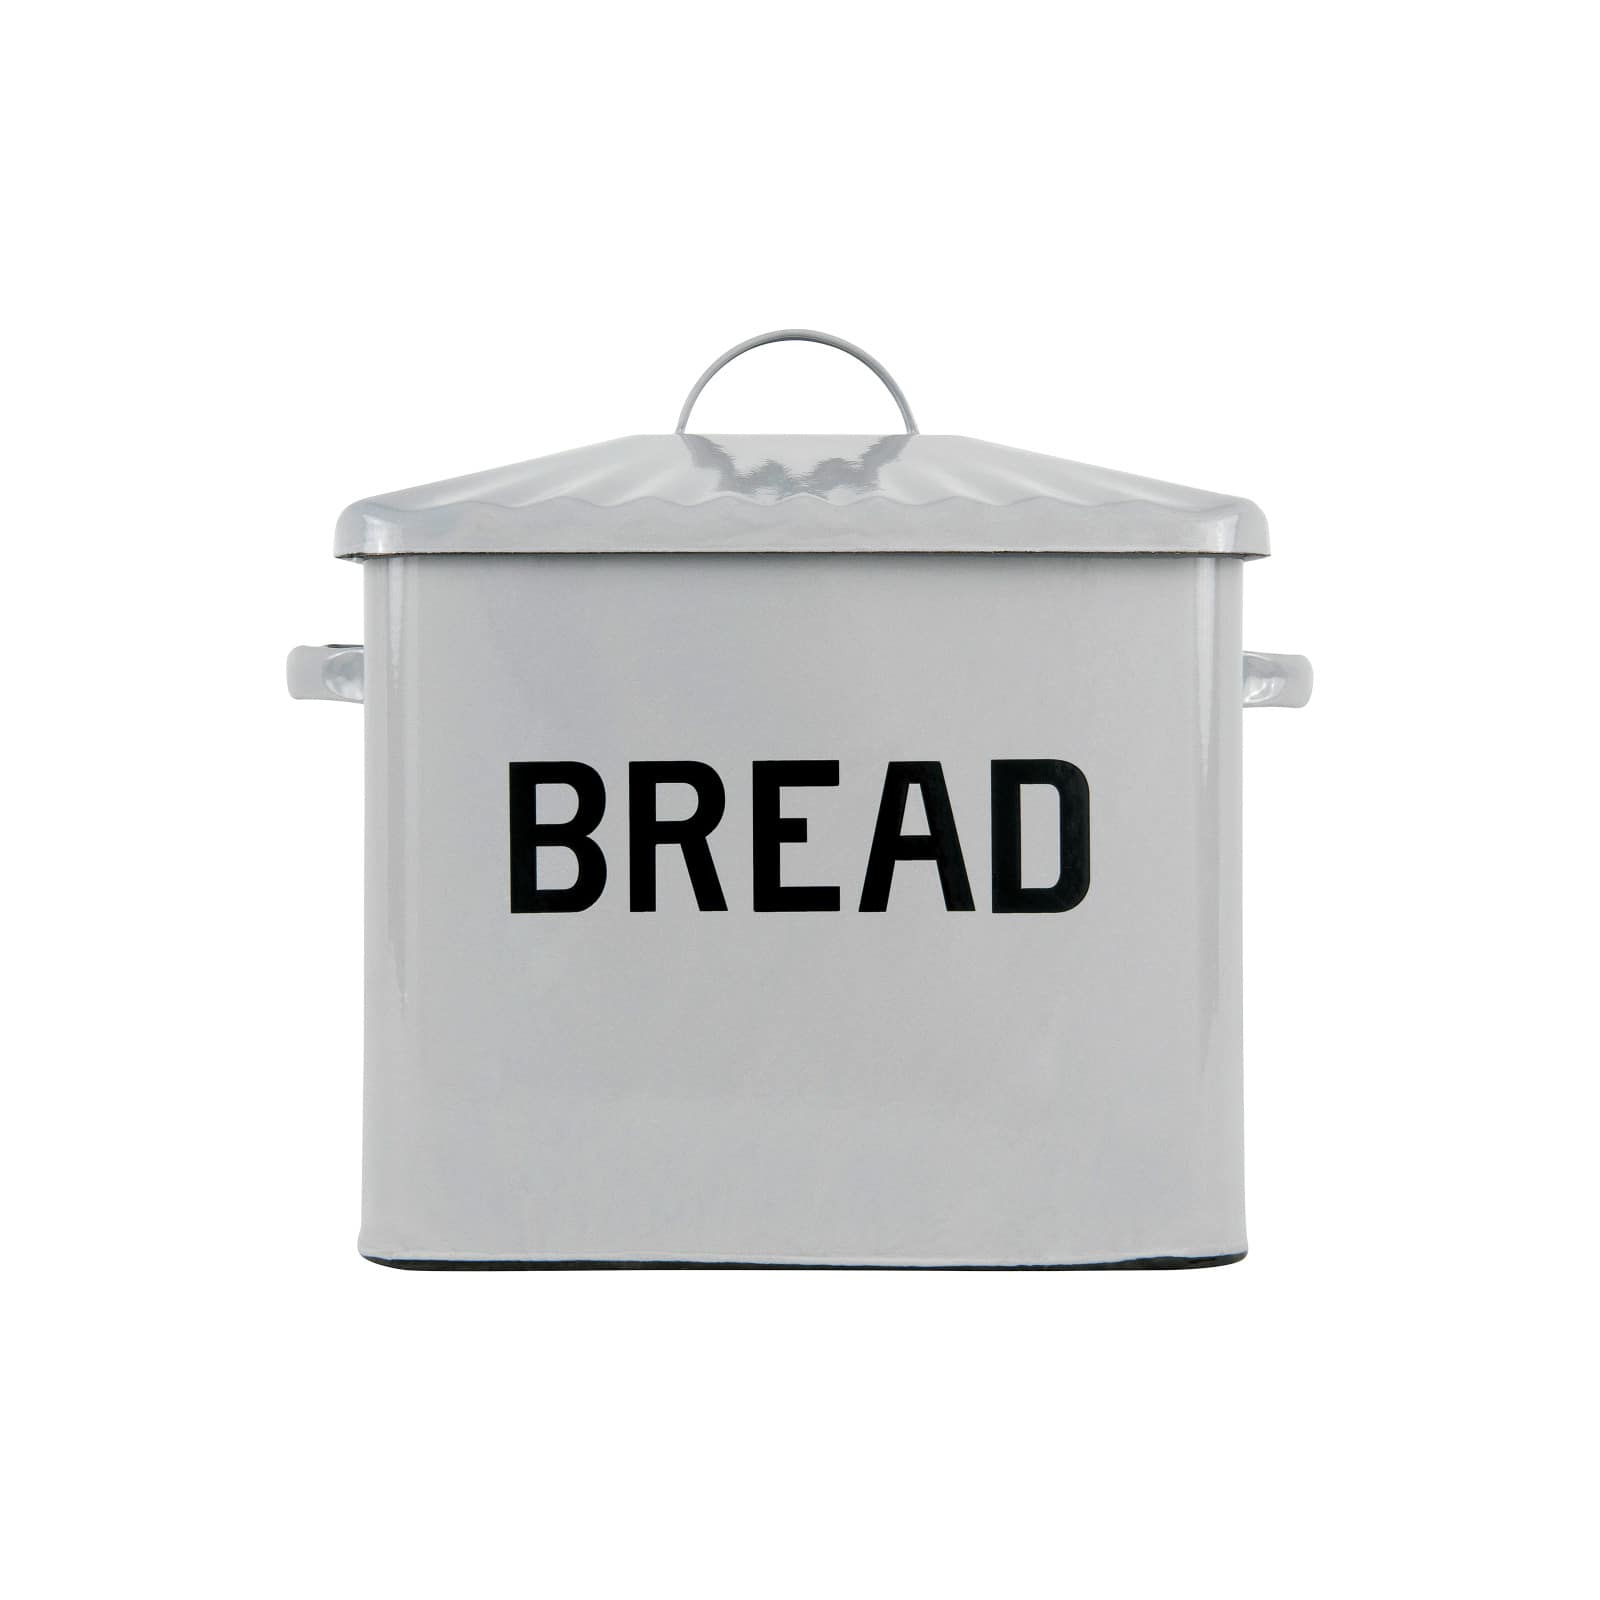 Enameled Metal Distressed "BREAD" Box with Lid